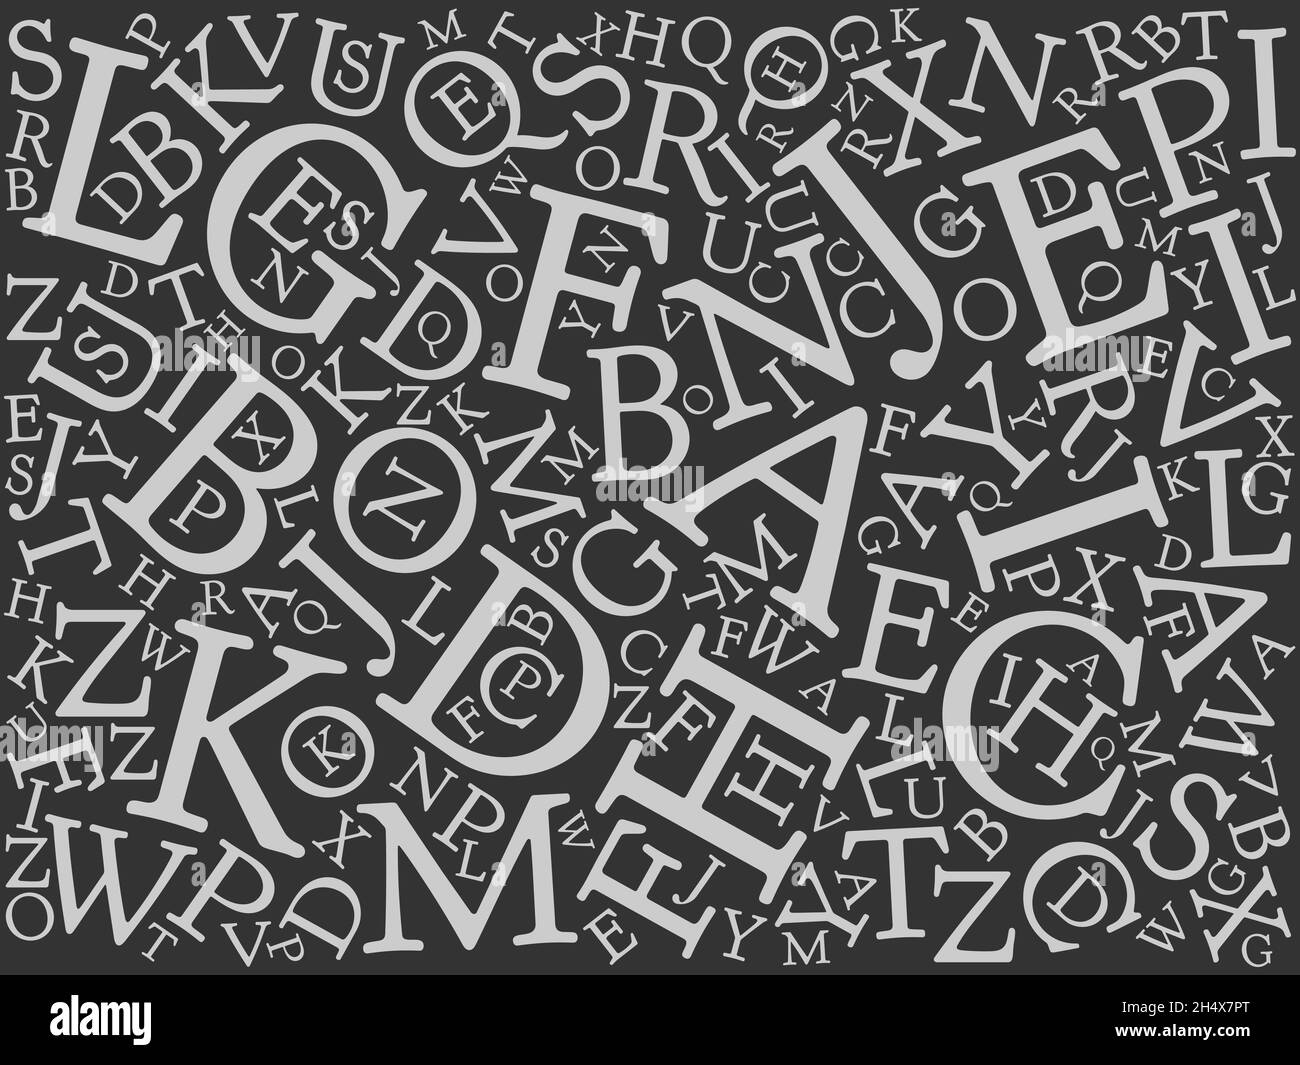 Background mosaic of letters Stock Vector